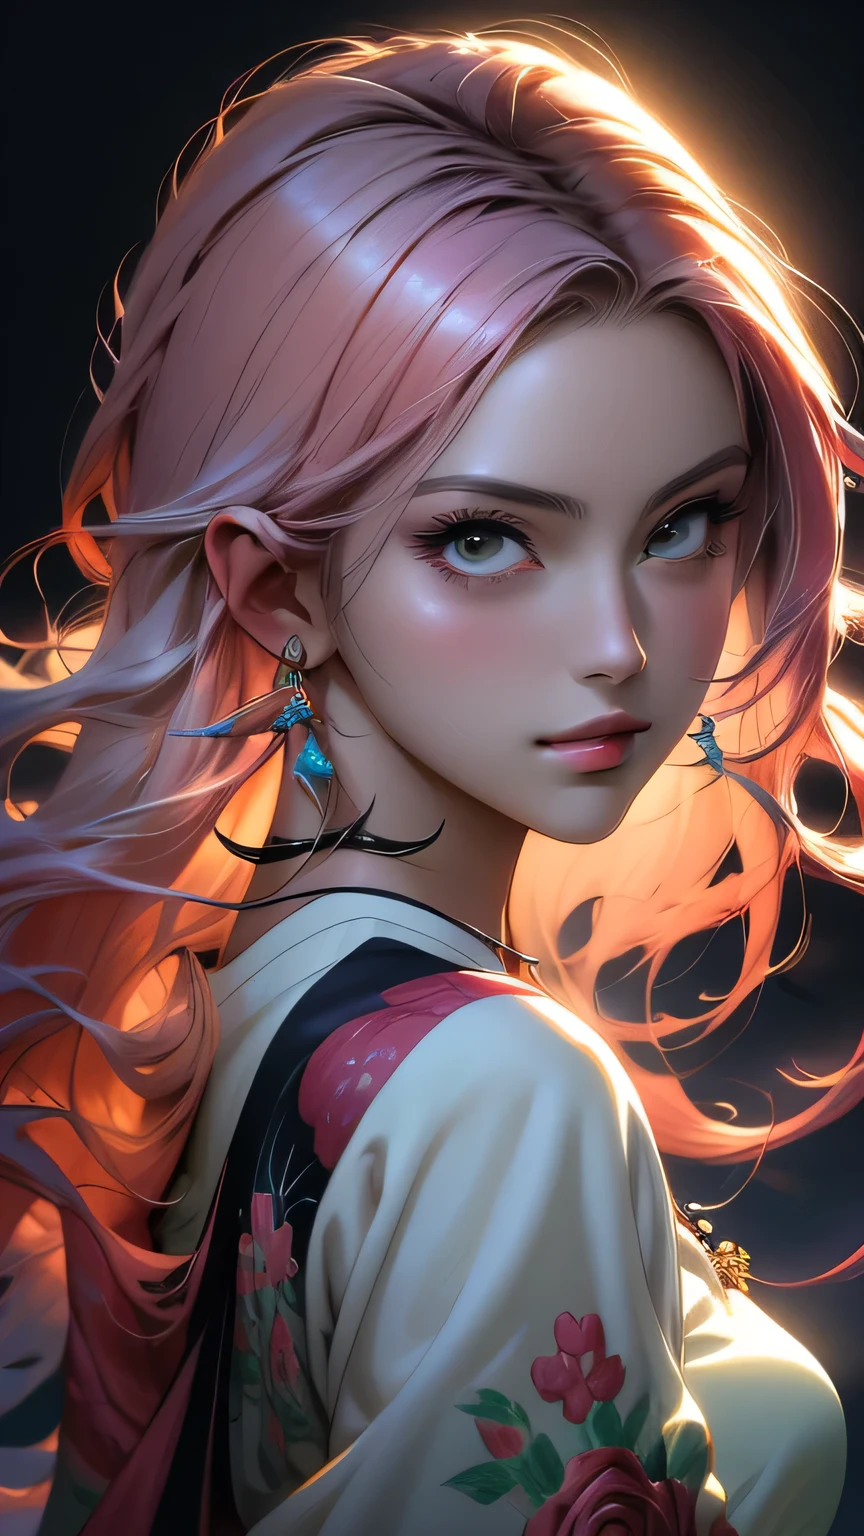 Close-up of a woman with colorful hair and necklace, Anime girl with space-like hair, The gentle vitality of rose roses, Gubes-style artwork, Fantasy art style, colorful], Vivid fantasy style, Ross draws vibrant cartoons, cosmic and colorful, Gwaiz, colorful digital fantasy art, Great art style, Beautiful anime style, Full body lighting, Skin Brightness, Sexy look, (Dynamic pose)､ masterpiece, 最high quality, high quality, High resolution､((Upper body portrait))､Upper body portrait､